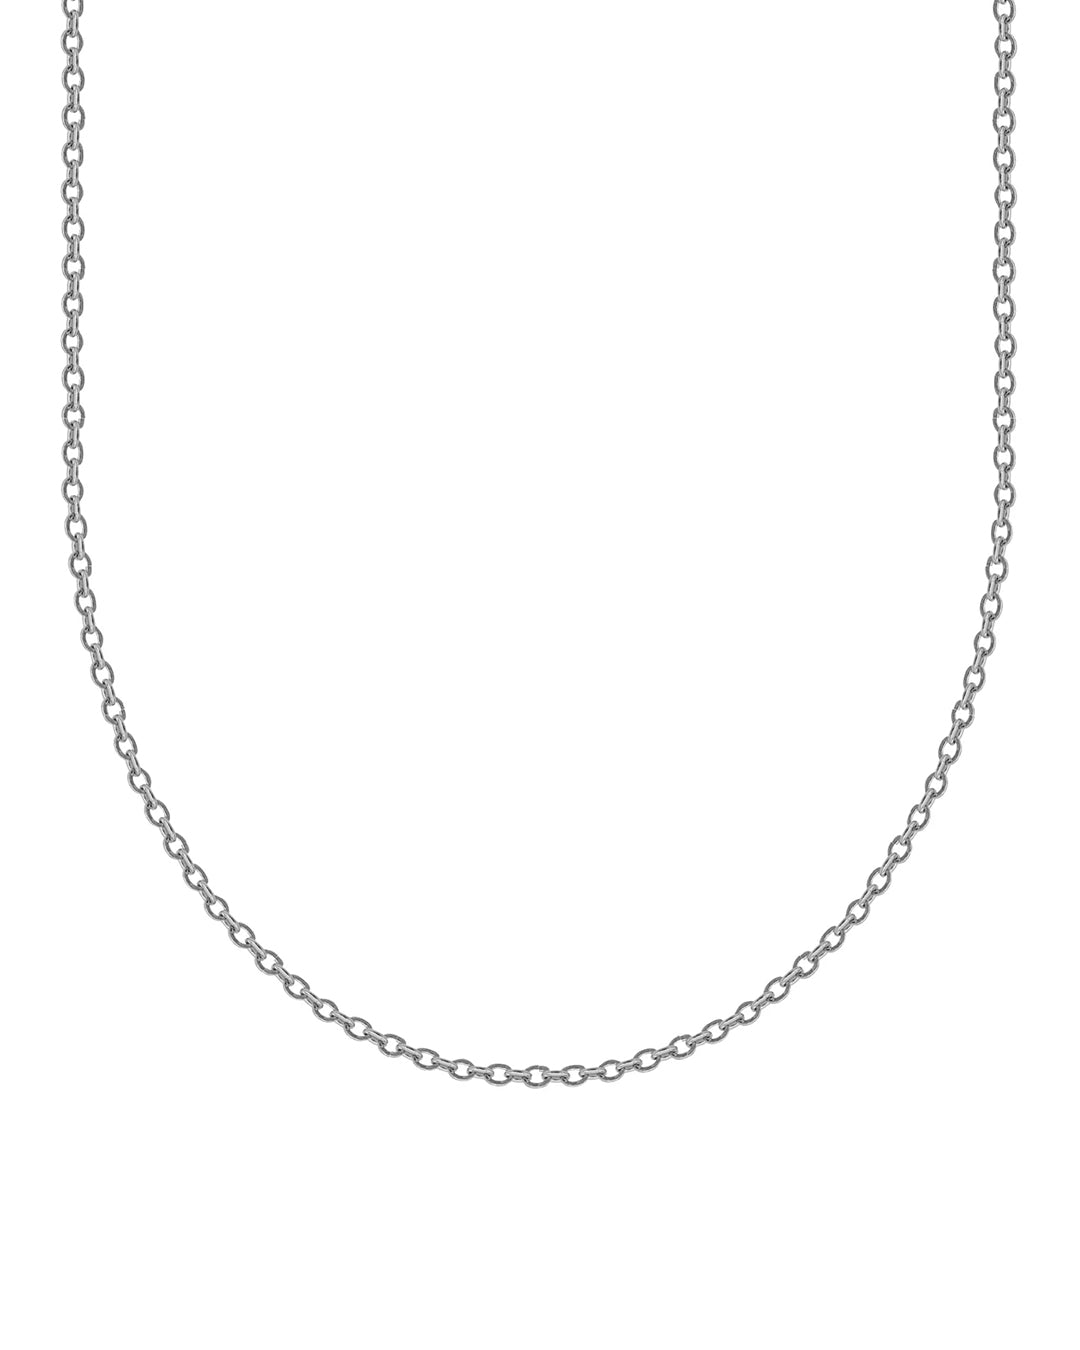 Thin Oval Chain 2mm (Silver)